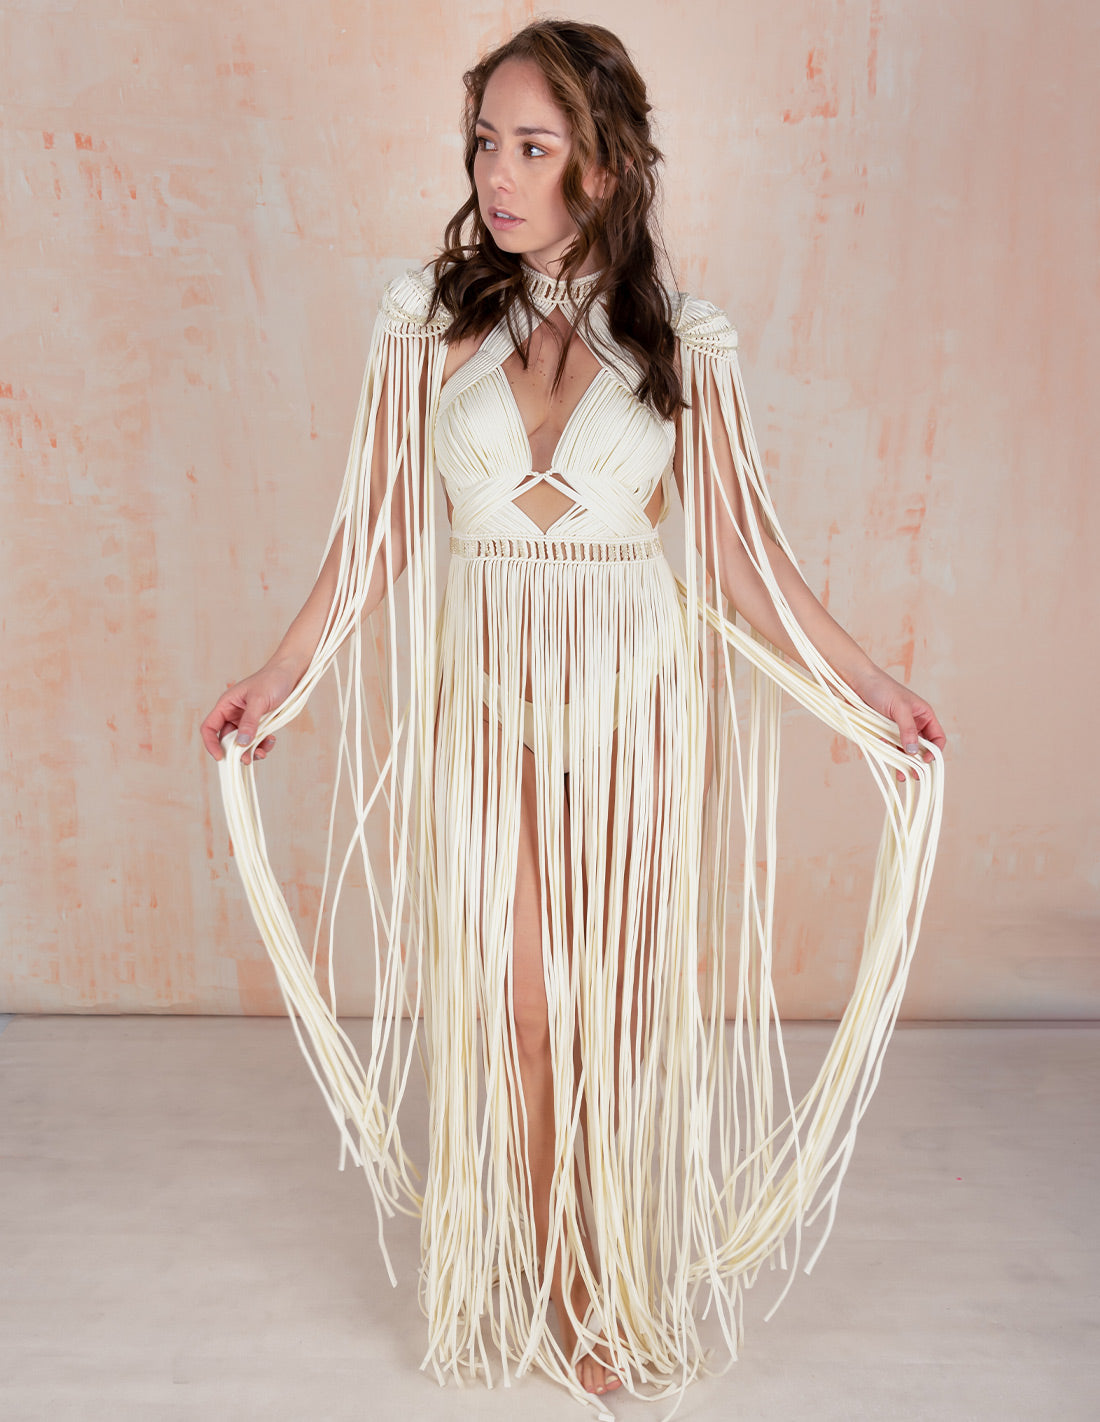 Cadere Glow Dress Ivory. Dress With Hand Woven Macramé In Ivory. Entreaguas